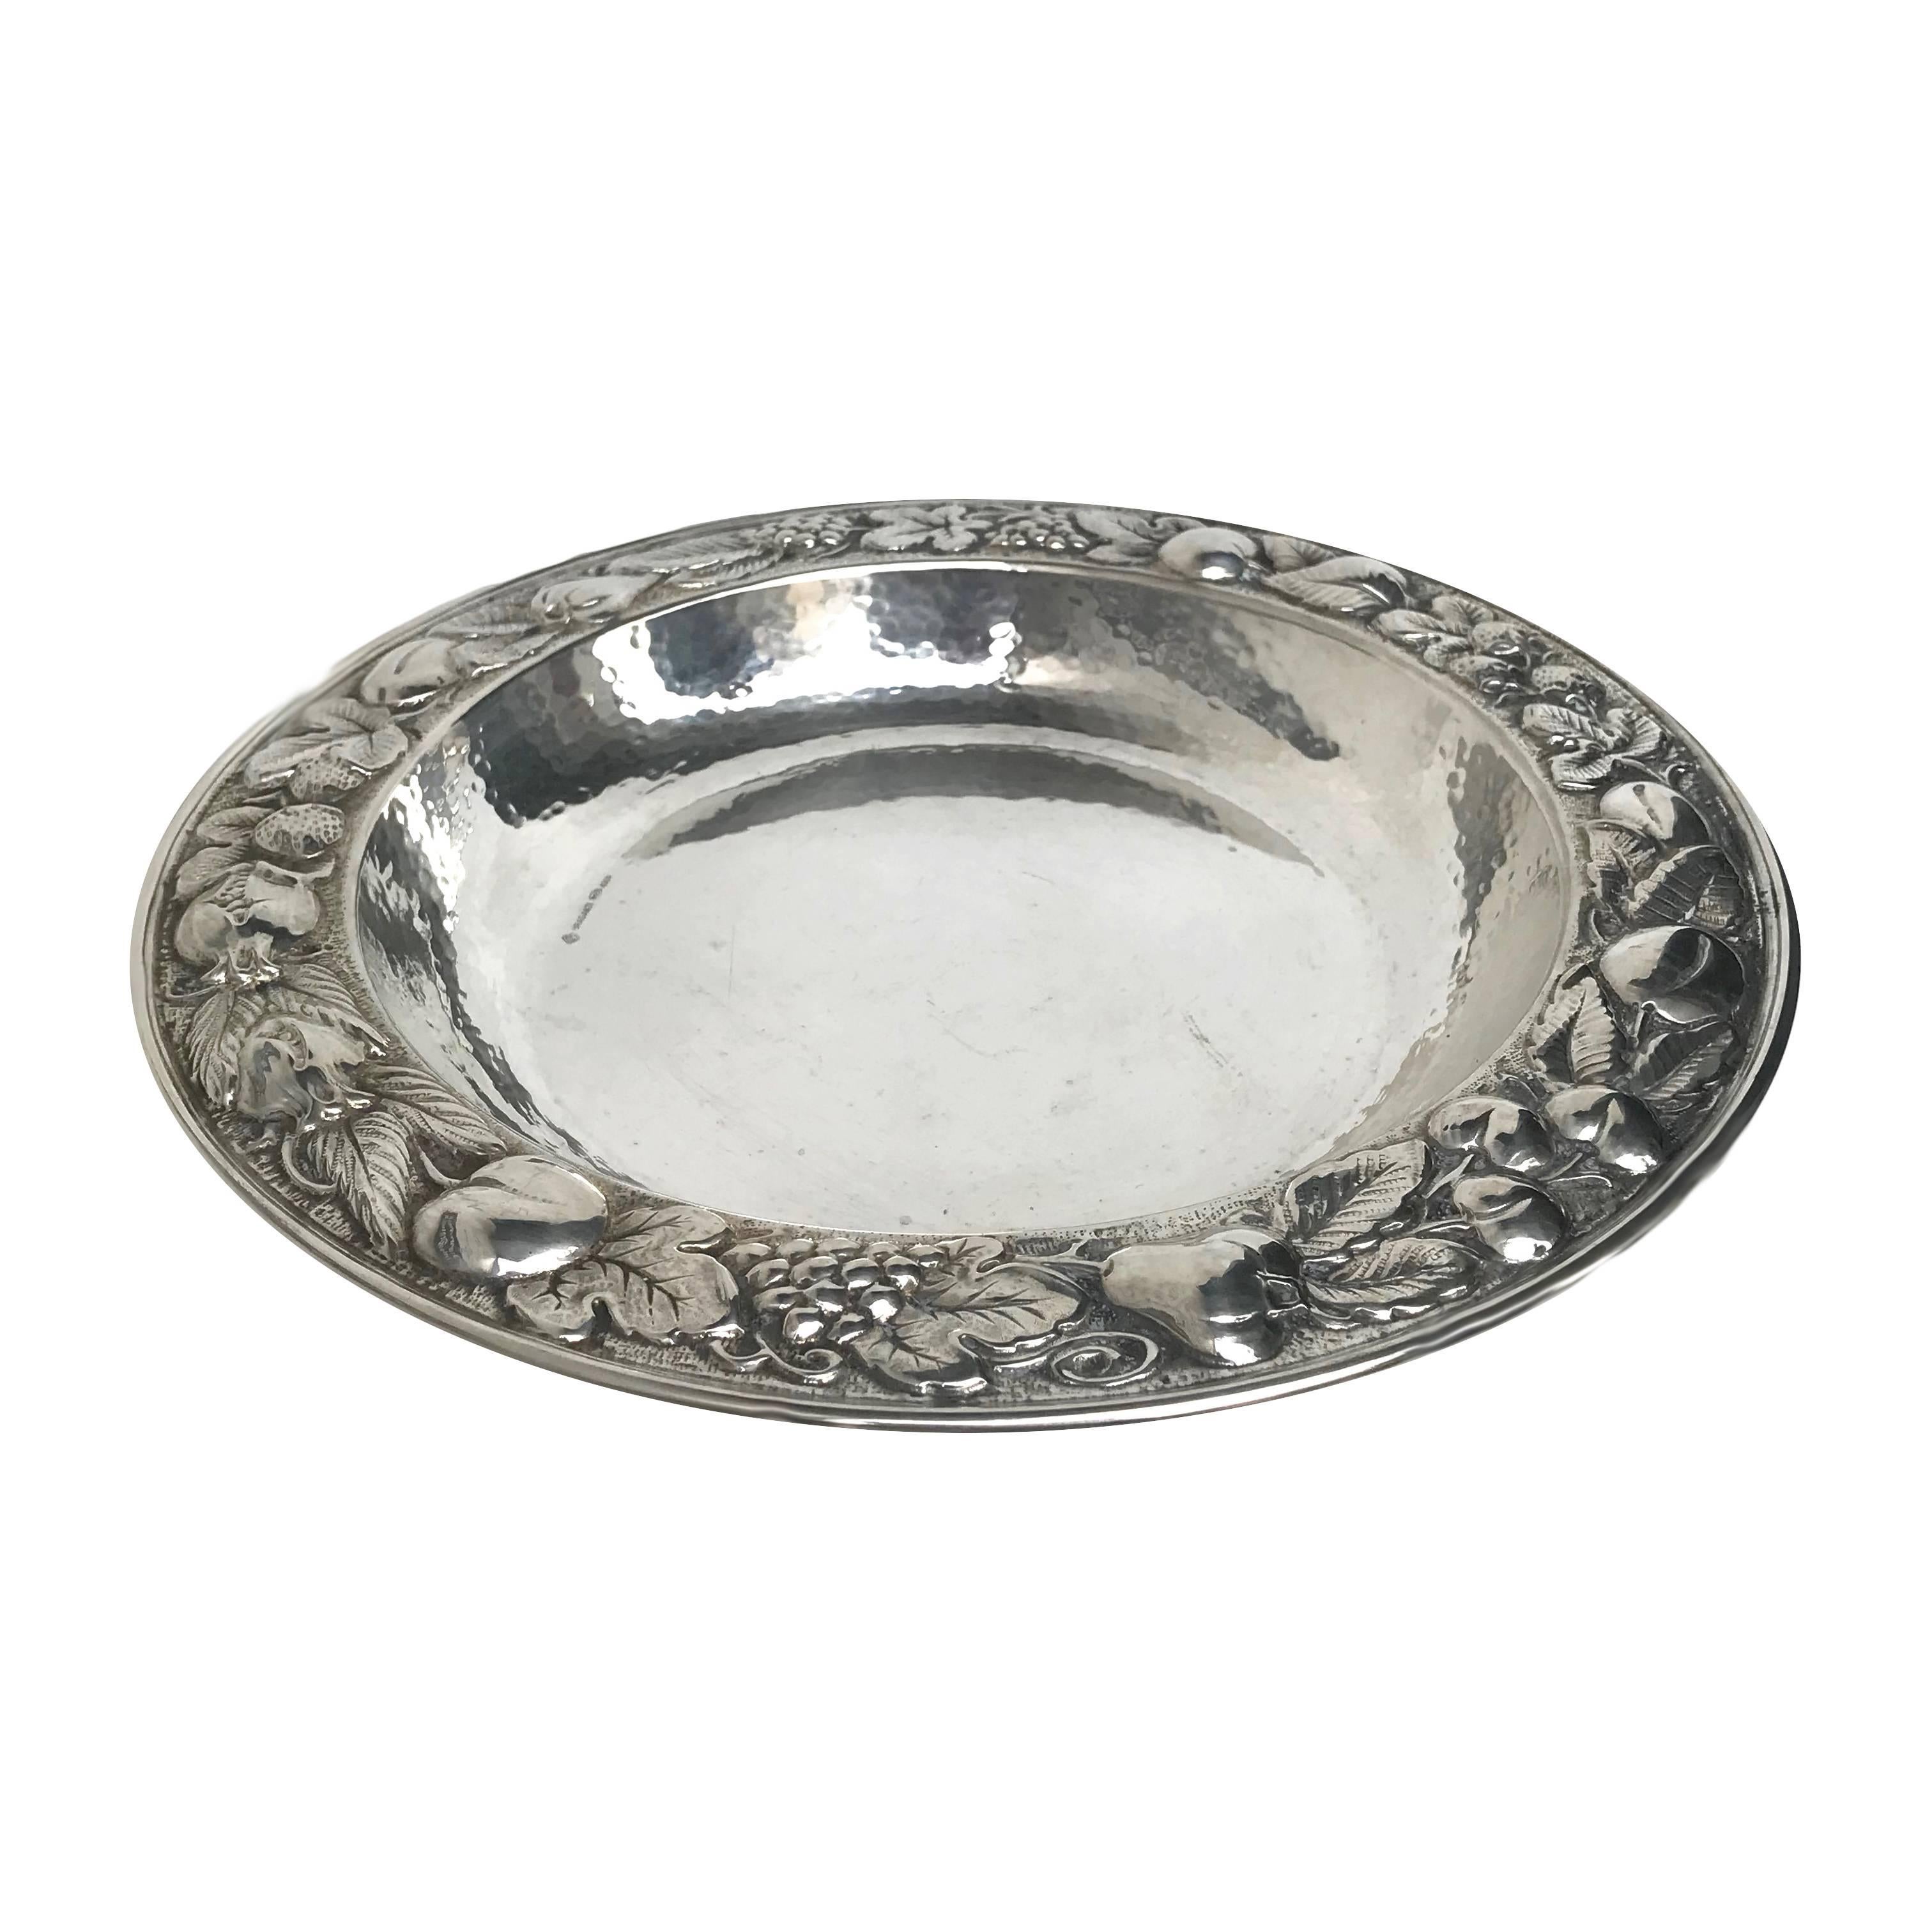 This elegant centrepiece is a deep dish entirely made in silver whose internal surface is textured with the classic hammered surface, while the lip is intricately adorned with a magnificent chiselled decoration that depicts a garland of leaves,